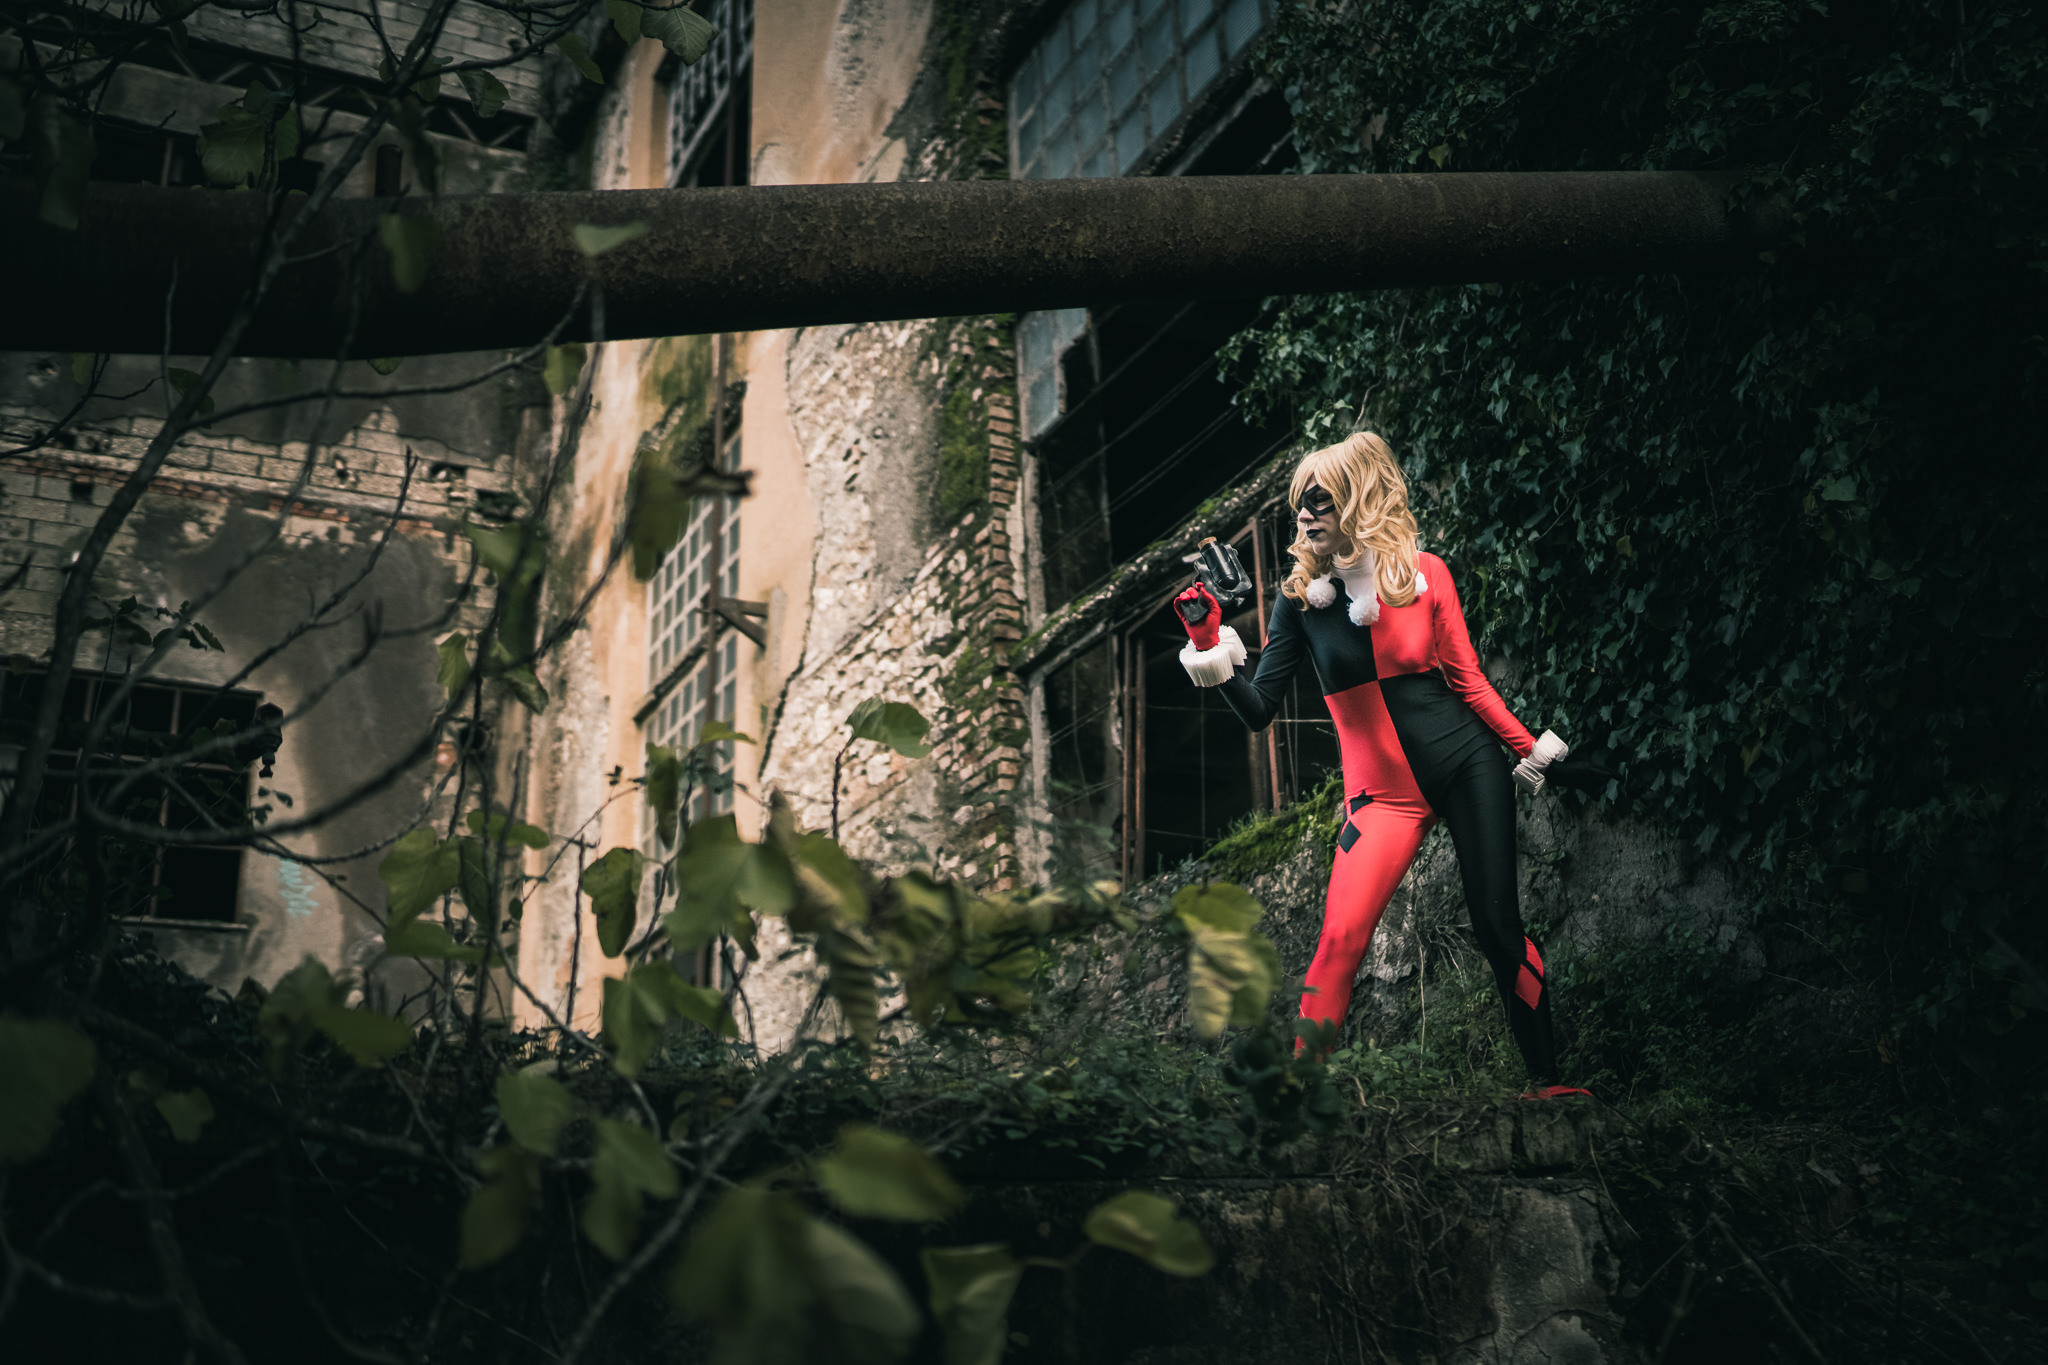 cosplayer impersonifying Harley Quinn, famous Marvel chacacter